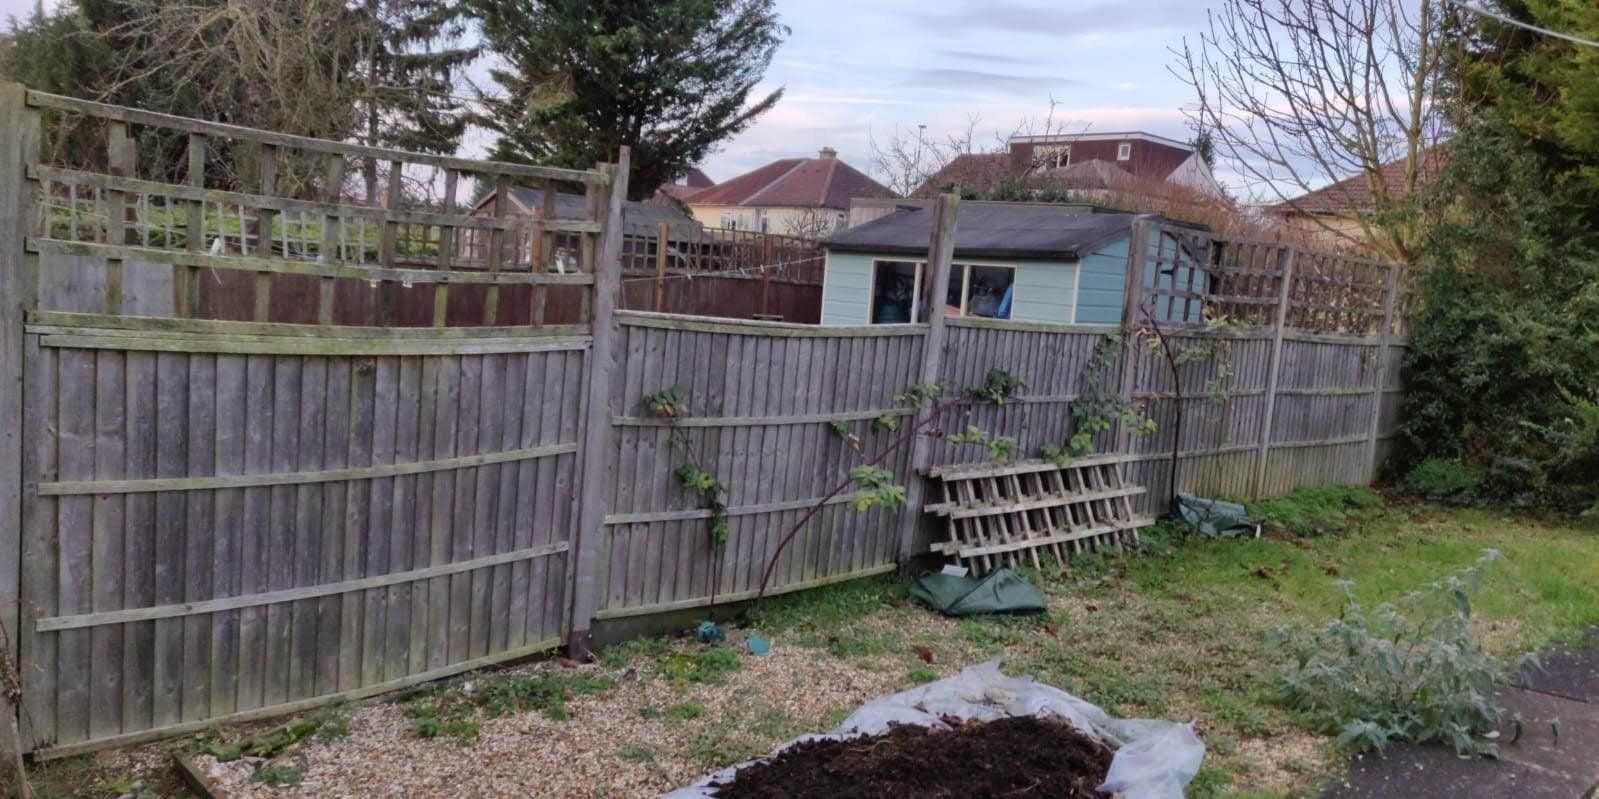 old wooden fence with trellis top before being replaced.